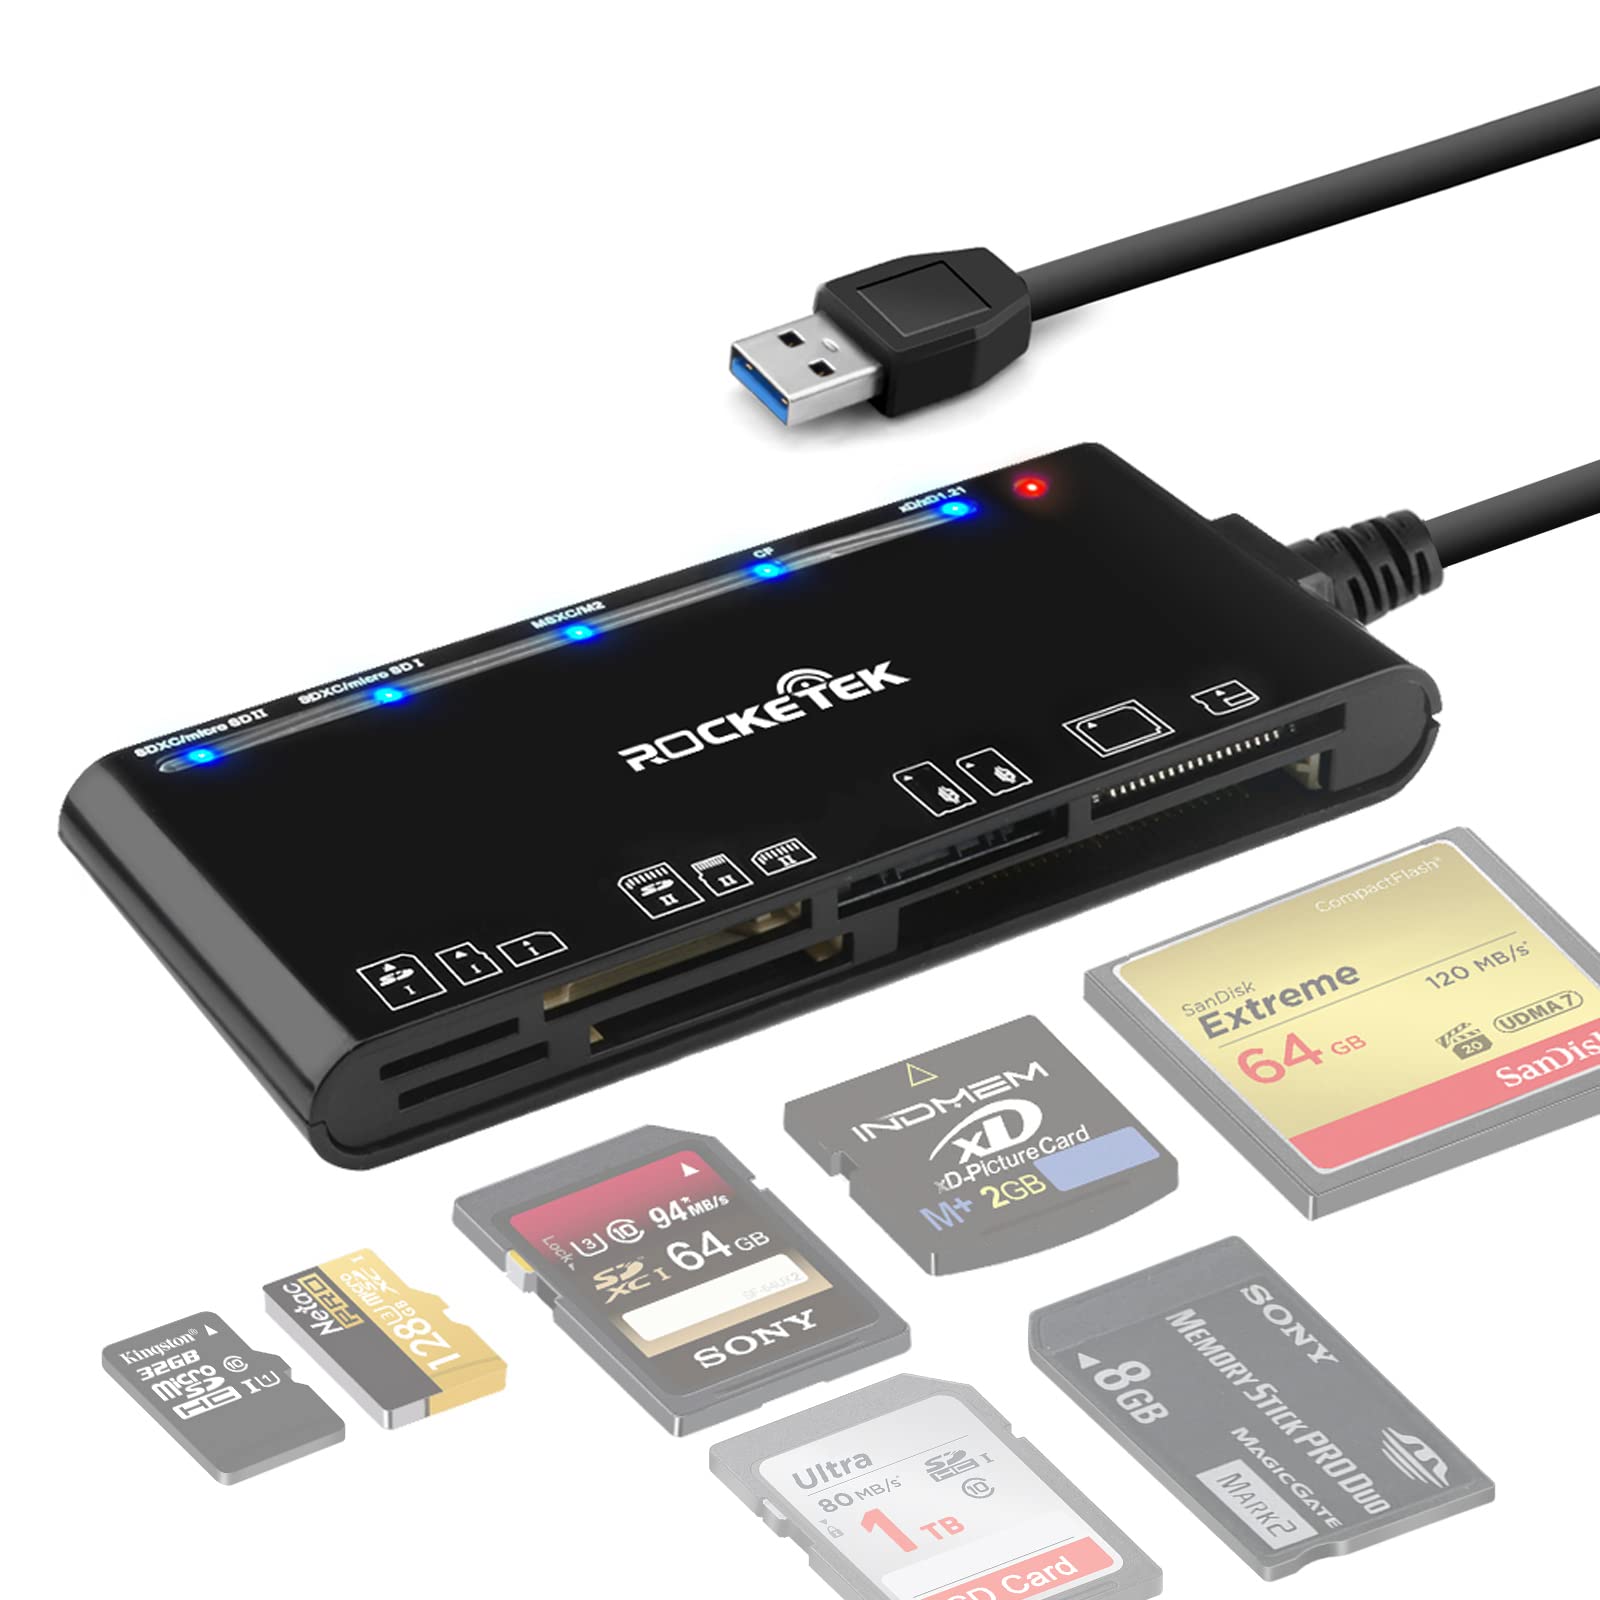 Card Reader USB 3.0, Rocketek 7 in 1 Memory Card Reader, USB 3.0 (5Gbps) High Speed CF/SD/TF/XD/MS/Micro SD Card Solt All in one Card Reader for Windows XP/Vista/Mac OS/Linux,etc